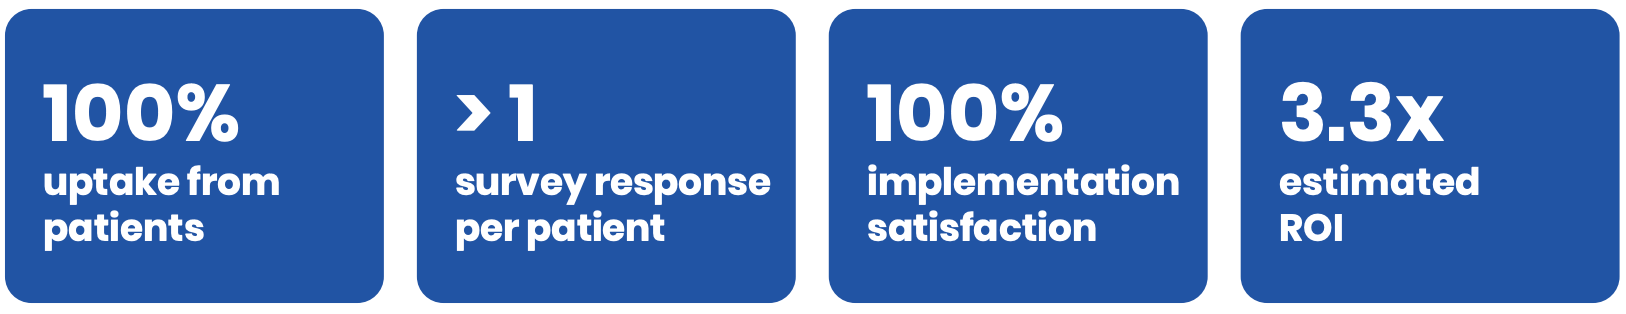 Metrics from case study showing 100% uptake from patients, greater than 1 survey response per patient, 100% implementation satisfaction, and 3.3x estimated ROI